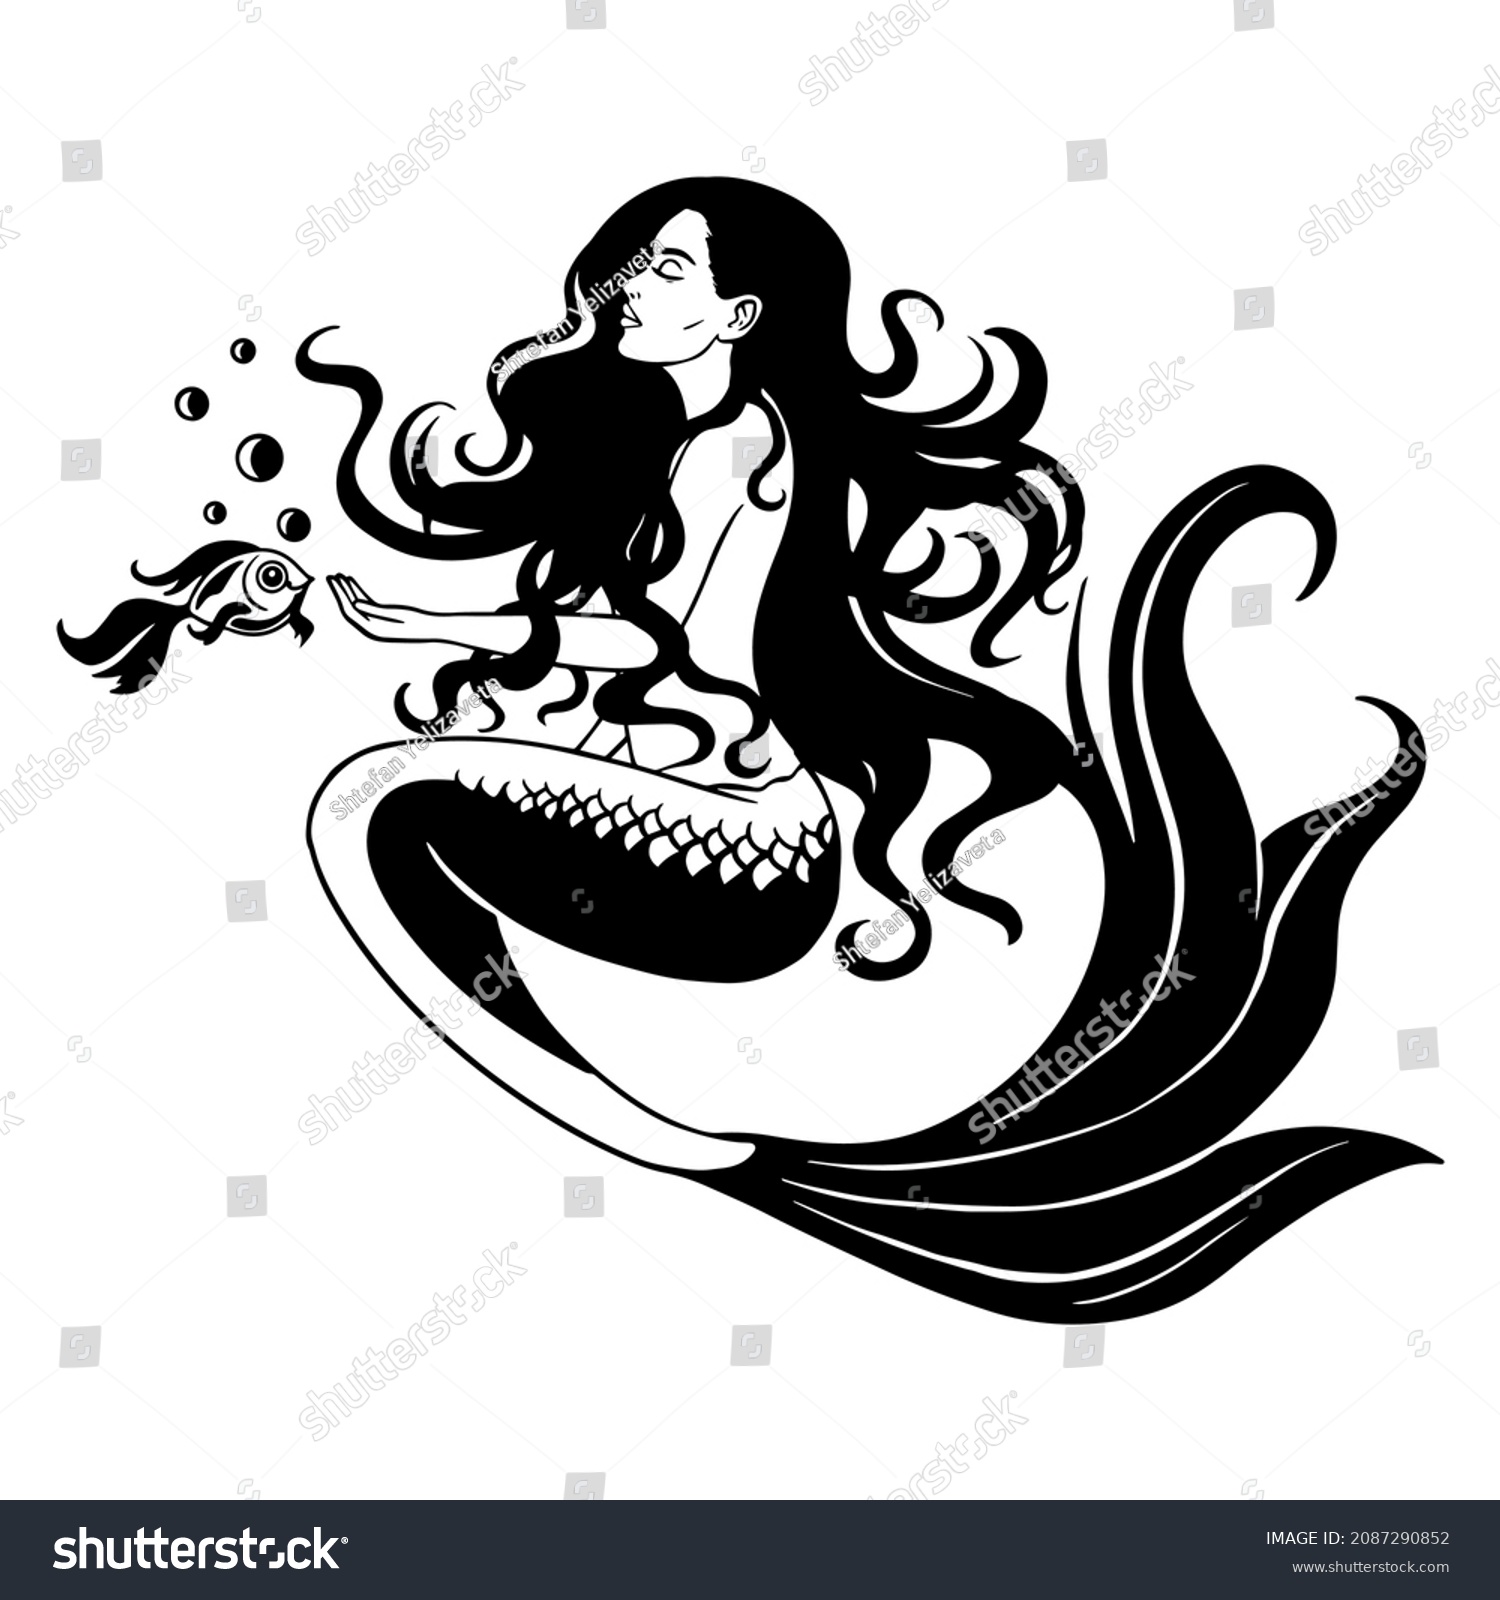 SVG of Young beautiful mermaid with a fish. Black silhouette. Design element. Vector illustration isolated on white background. Template for books, stickers, posters, postcards, clothes.mermaid cut file svg